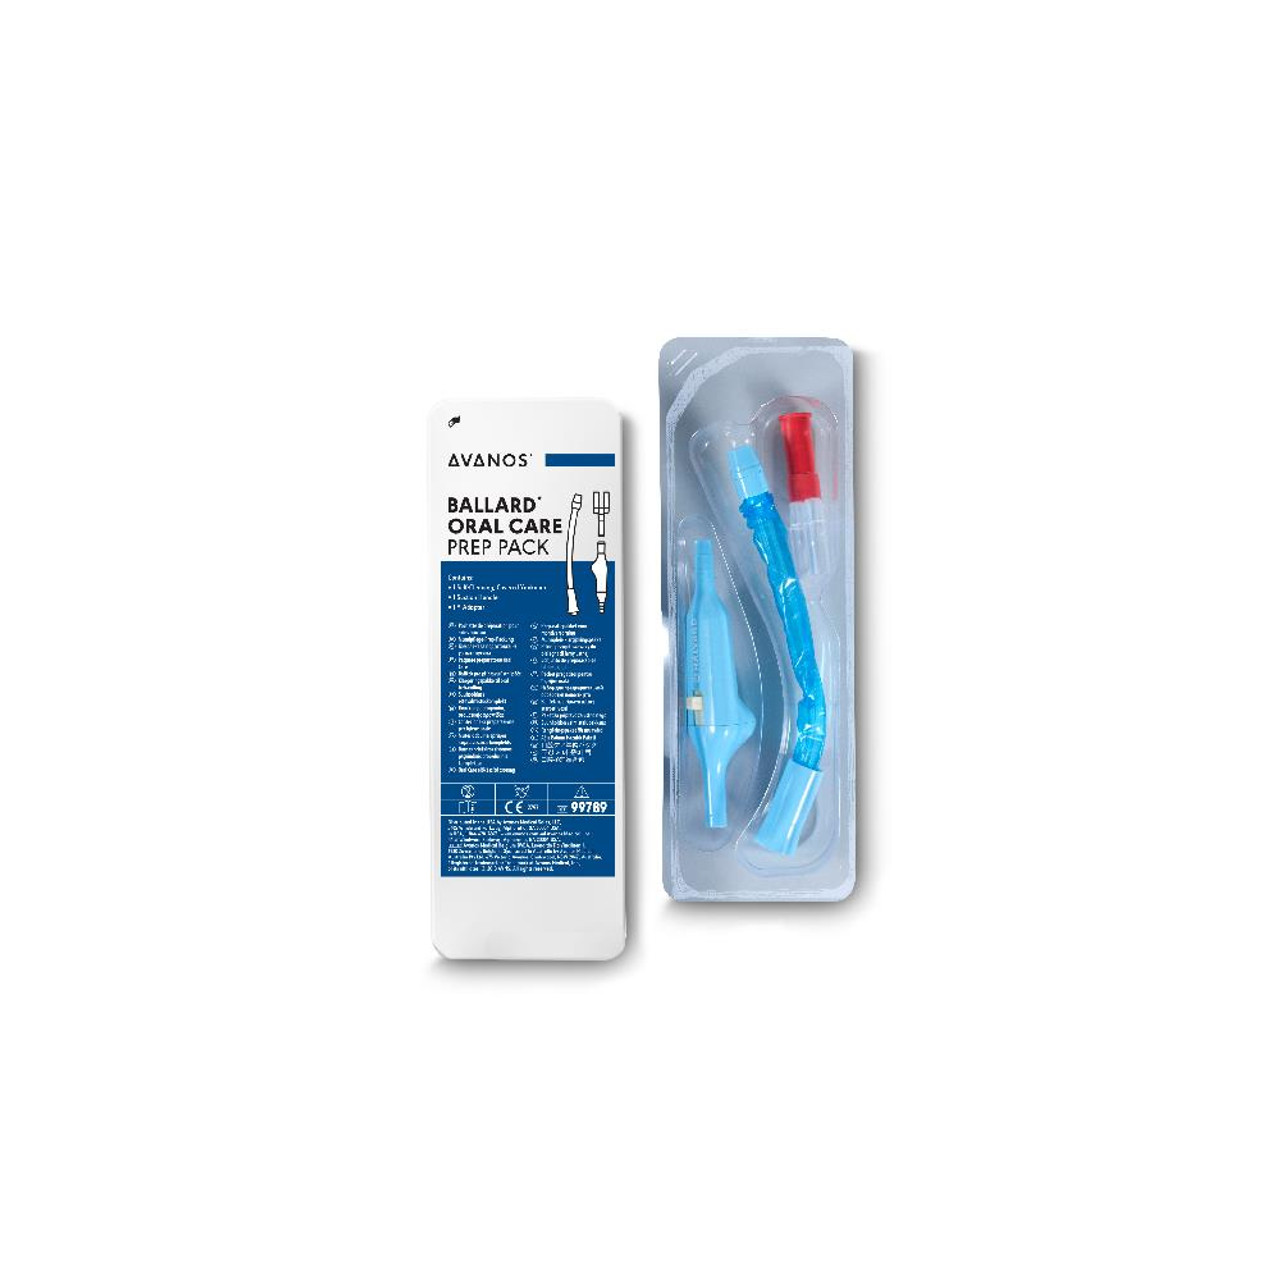 Avanos Oral Care Prep Pack Includes: Covered Yankauer, Suction Handle, "Y" Connector, 40/cs